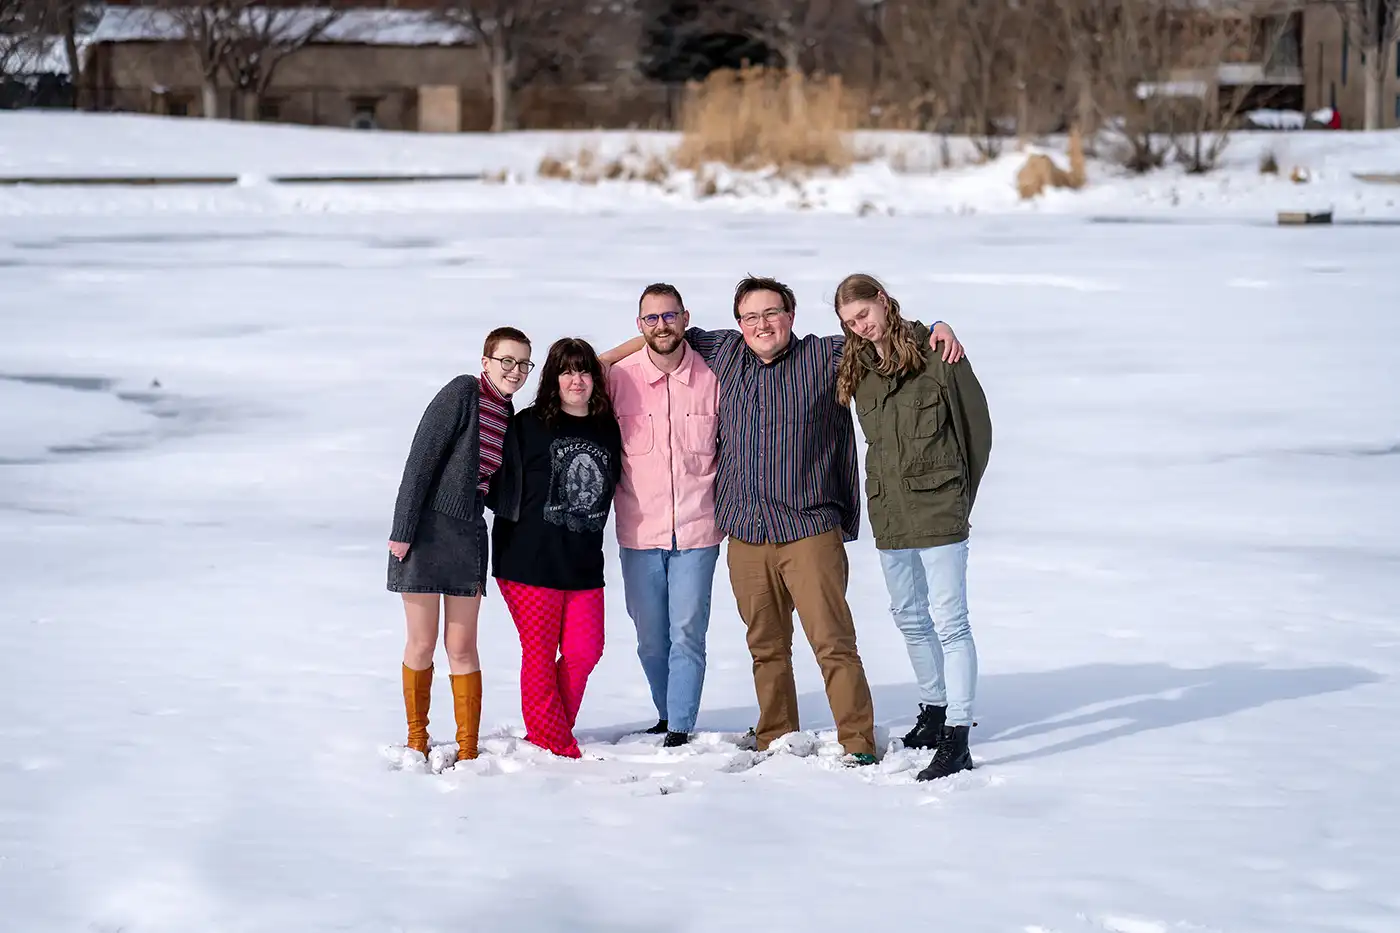 (L–R) Maggie Mattinson, Nicole Steinicke, Miles Larkin, Alek Nelson and Spencer Felix make up dream pop band Sharing. They stand in an open, snowy field.